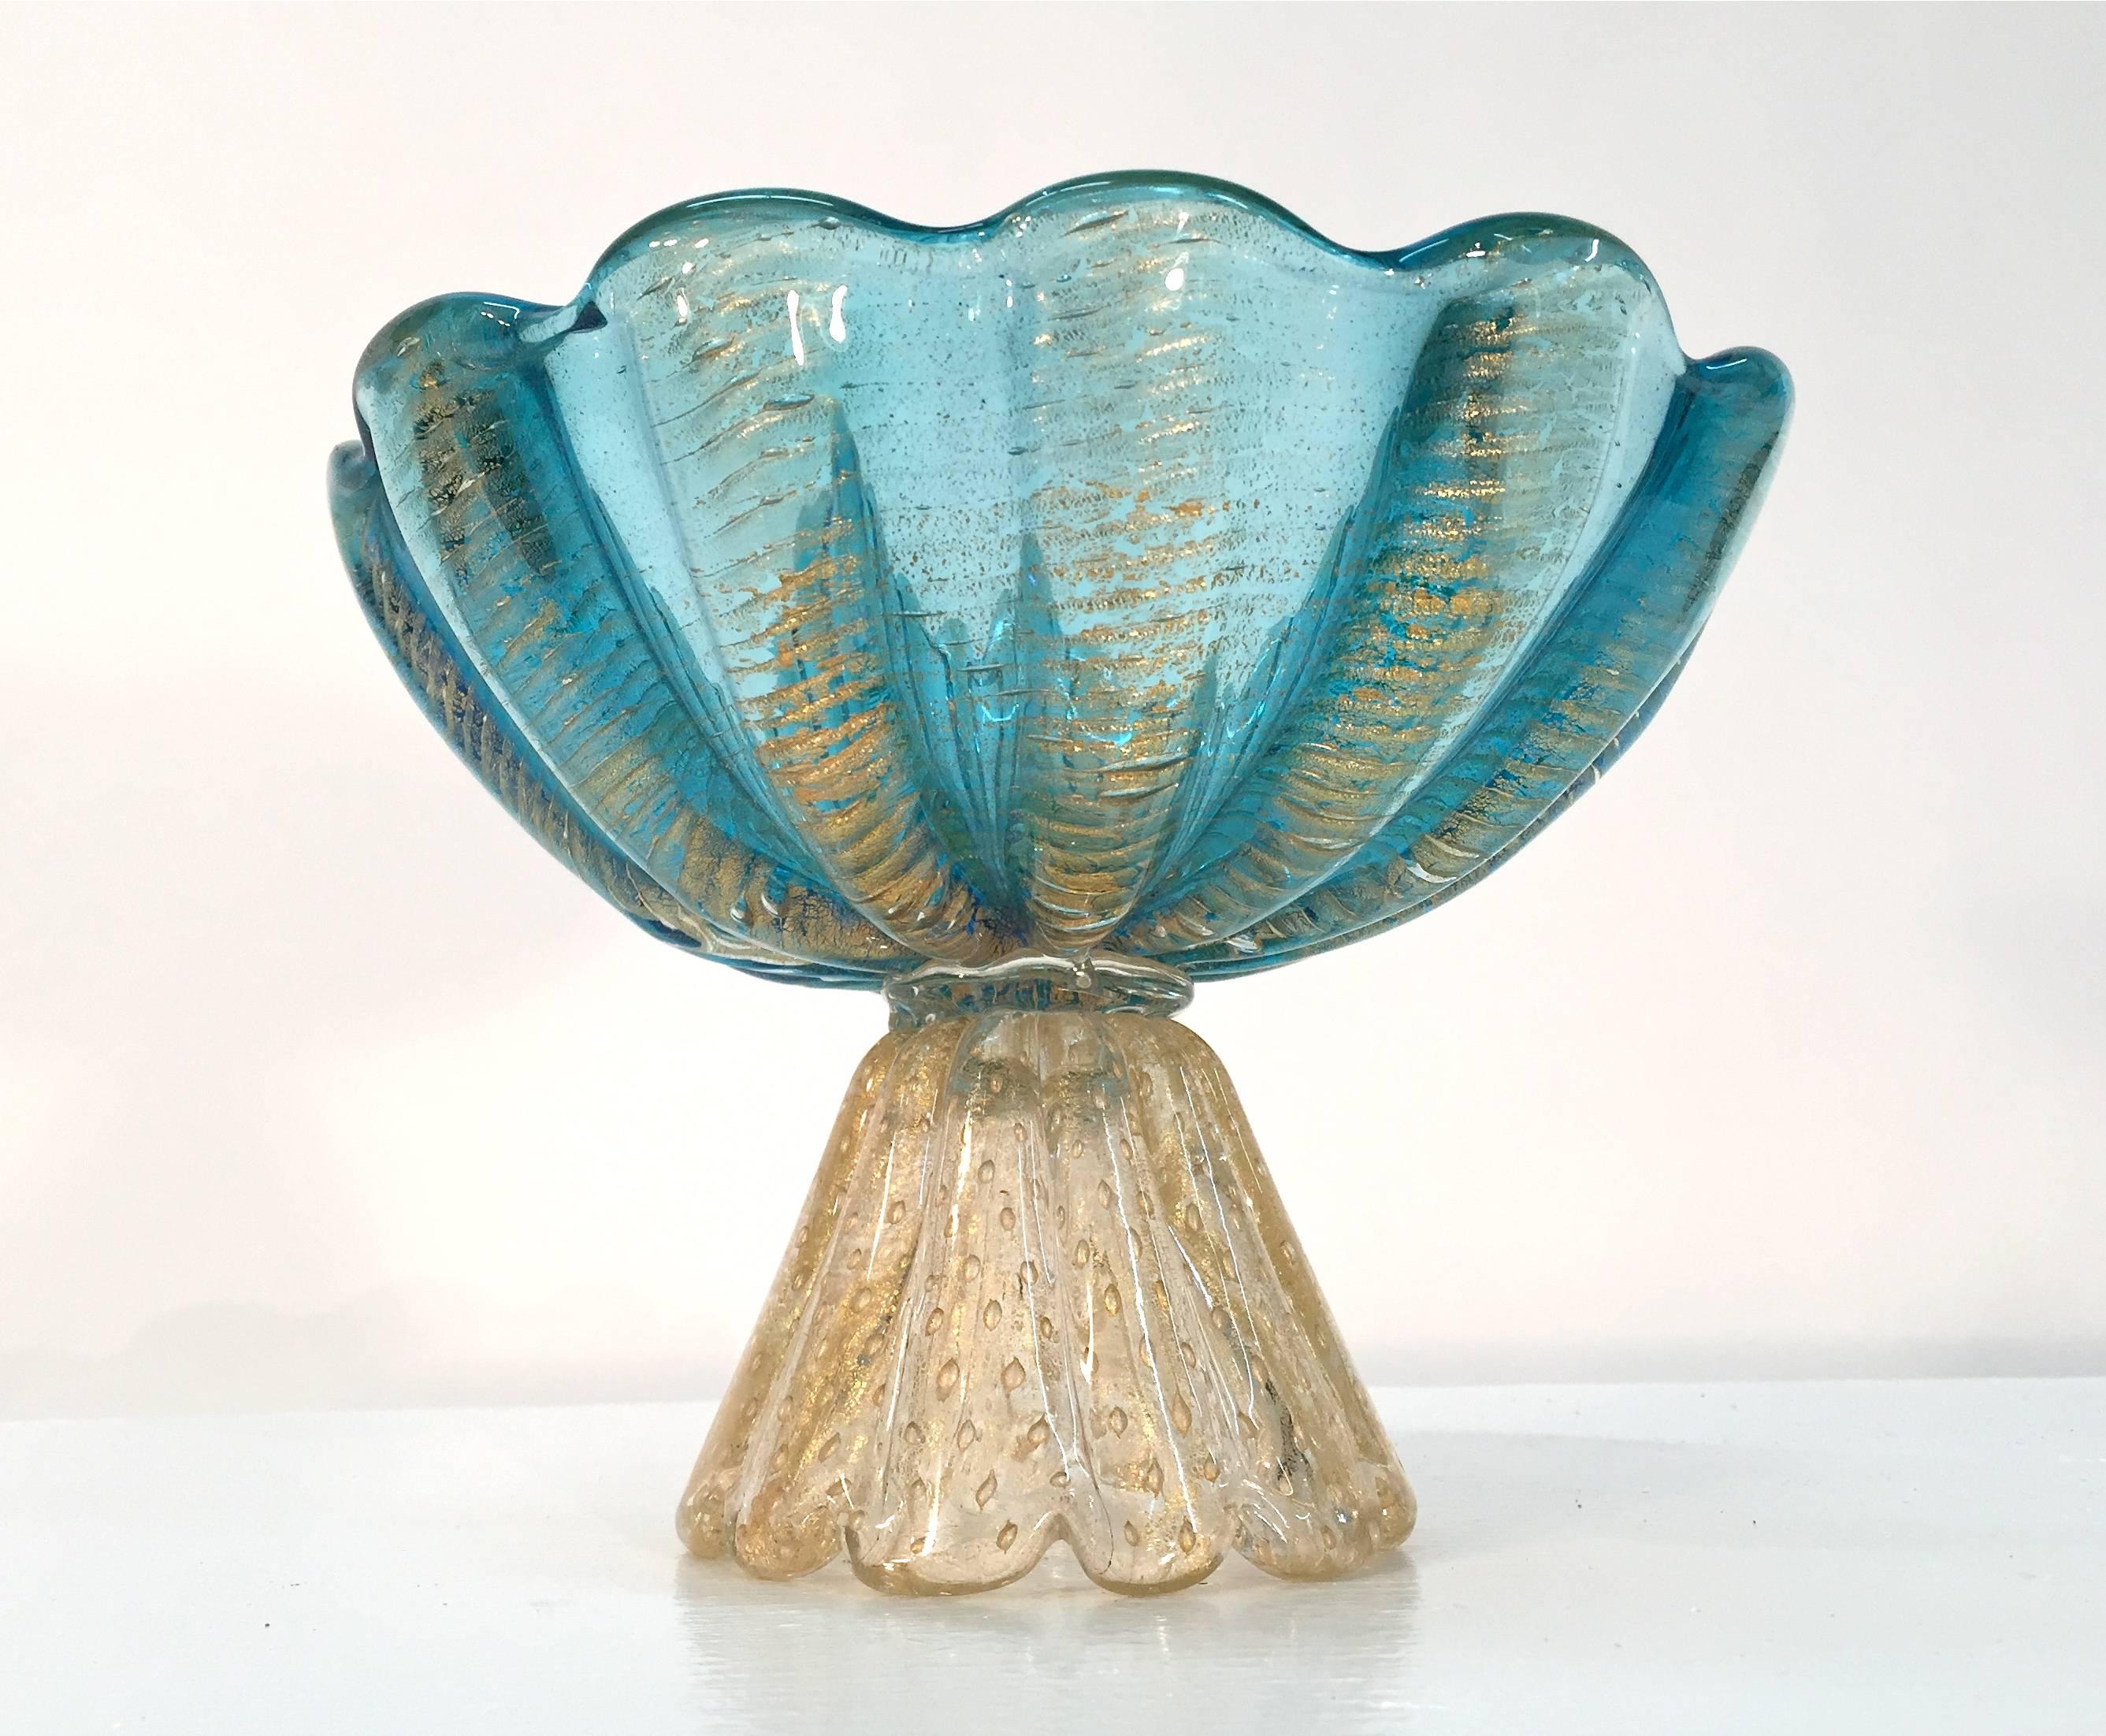 Ercole Barovier art glass footed compote bowl, Italy, 1950s.